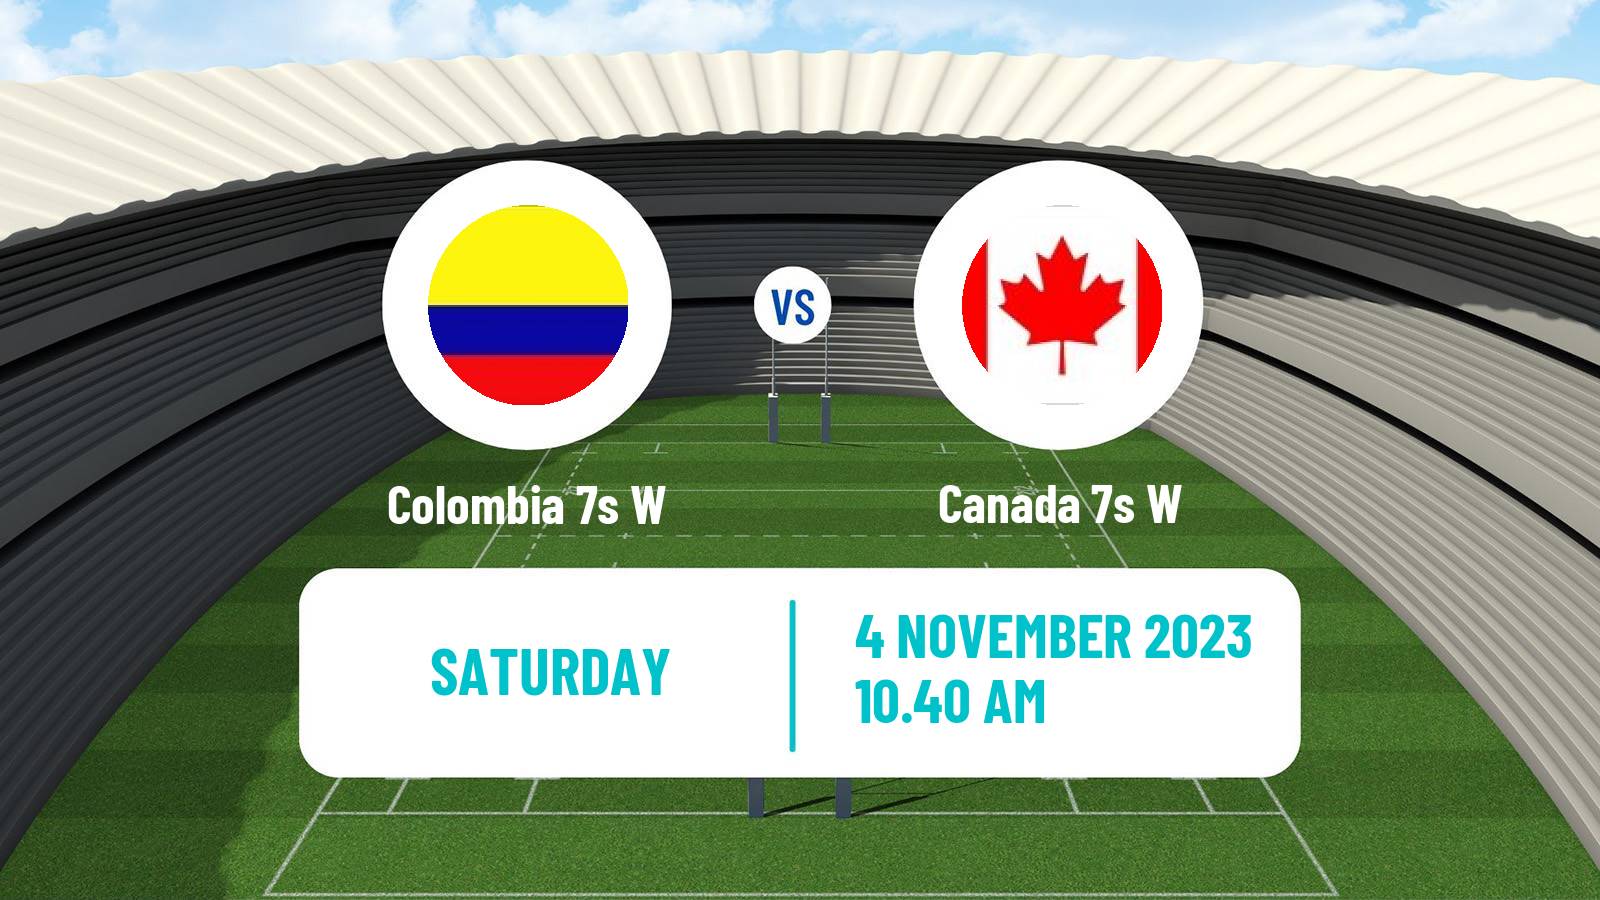 Rugby union Pan American 7s Rugby Women Colombia 7s W - Canada 7s W